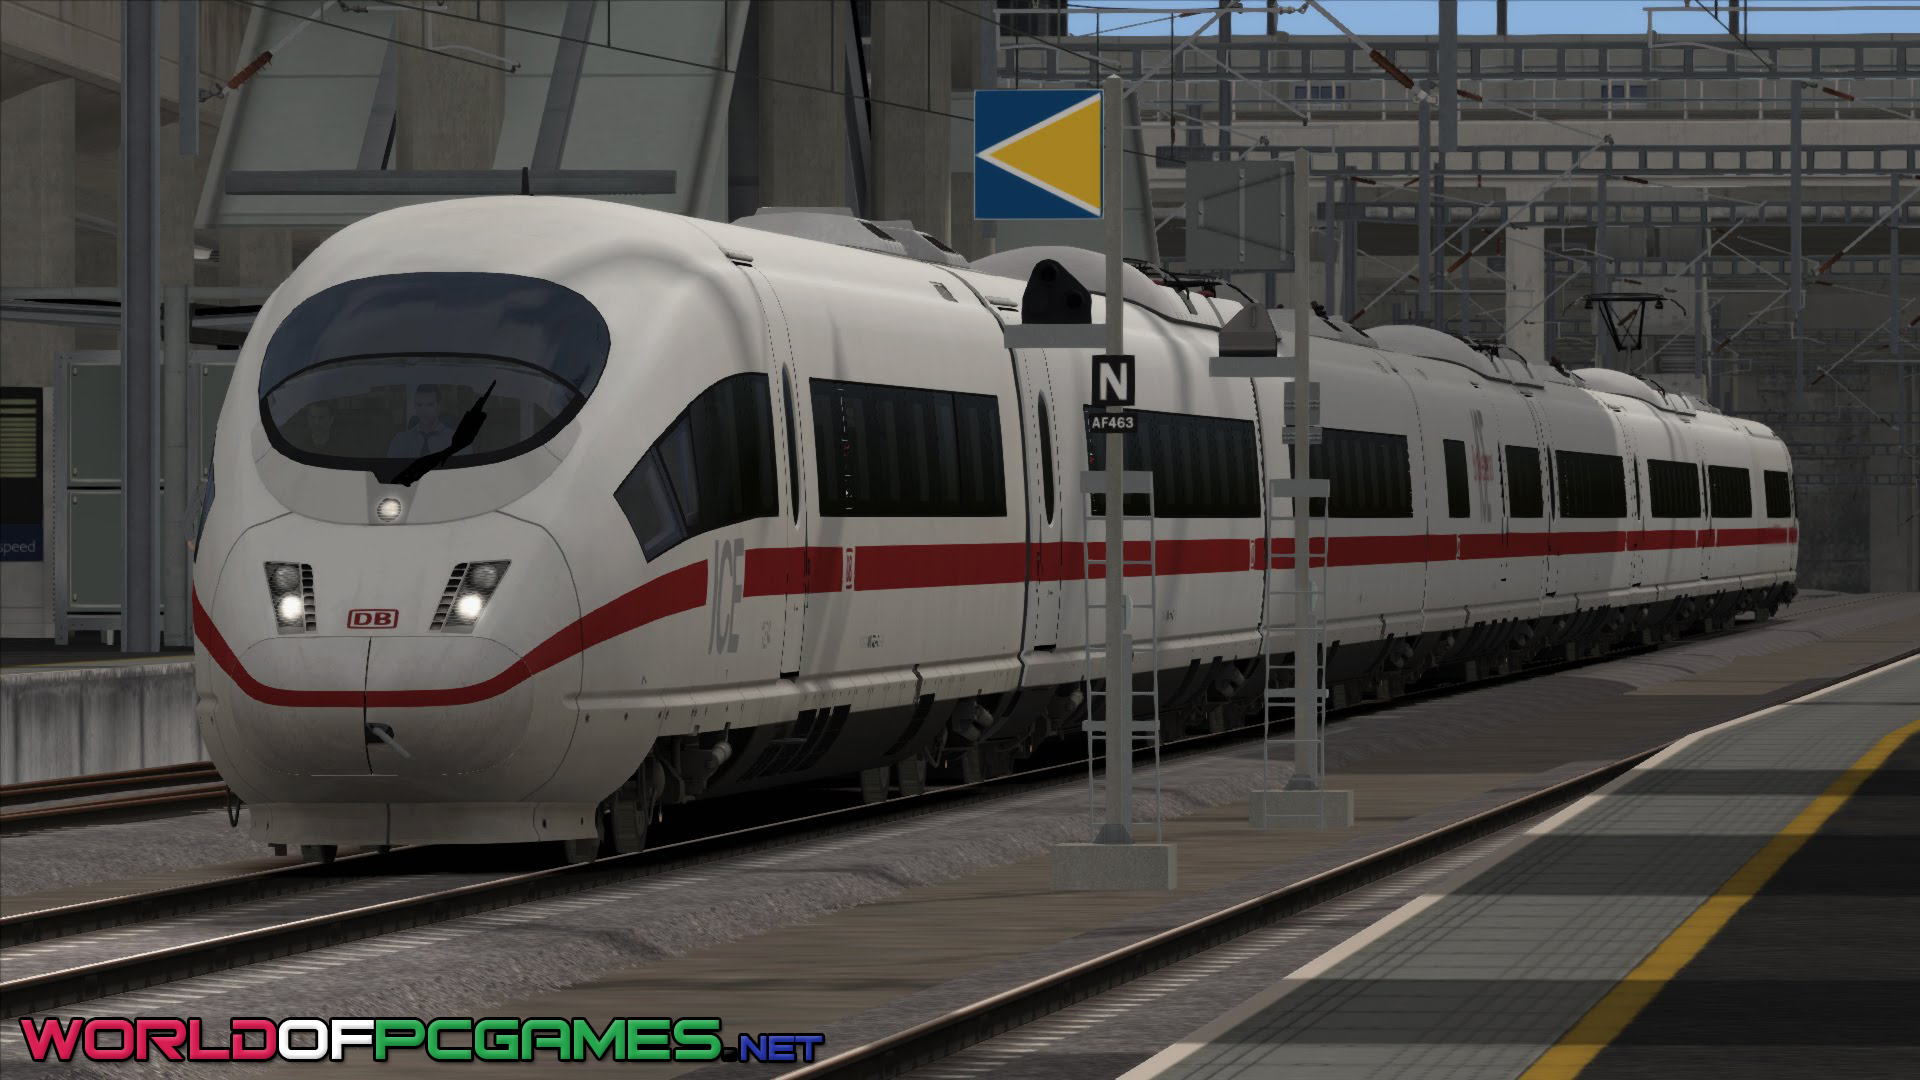 Train Simulator 2017 Free Download With All DLCs - 71